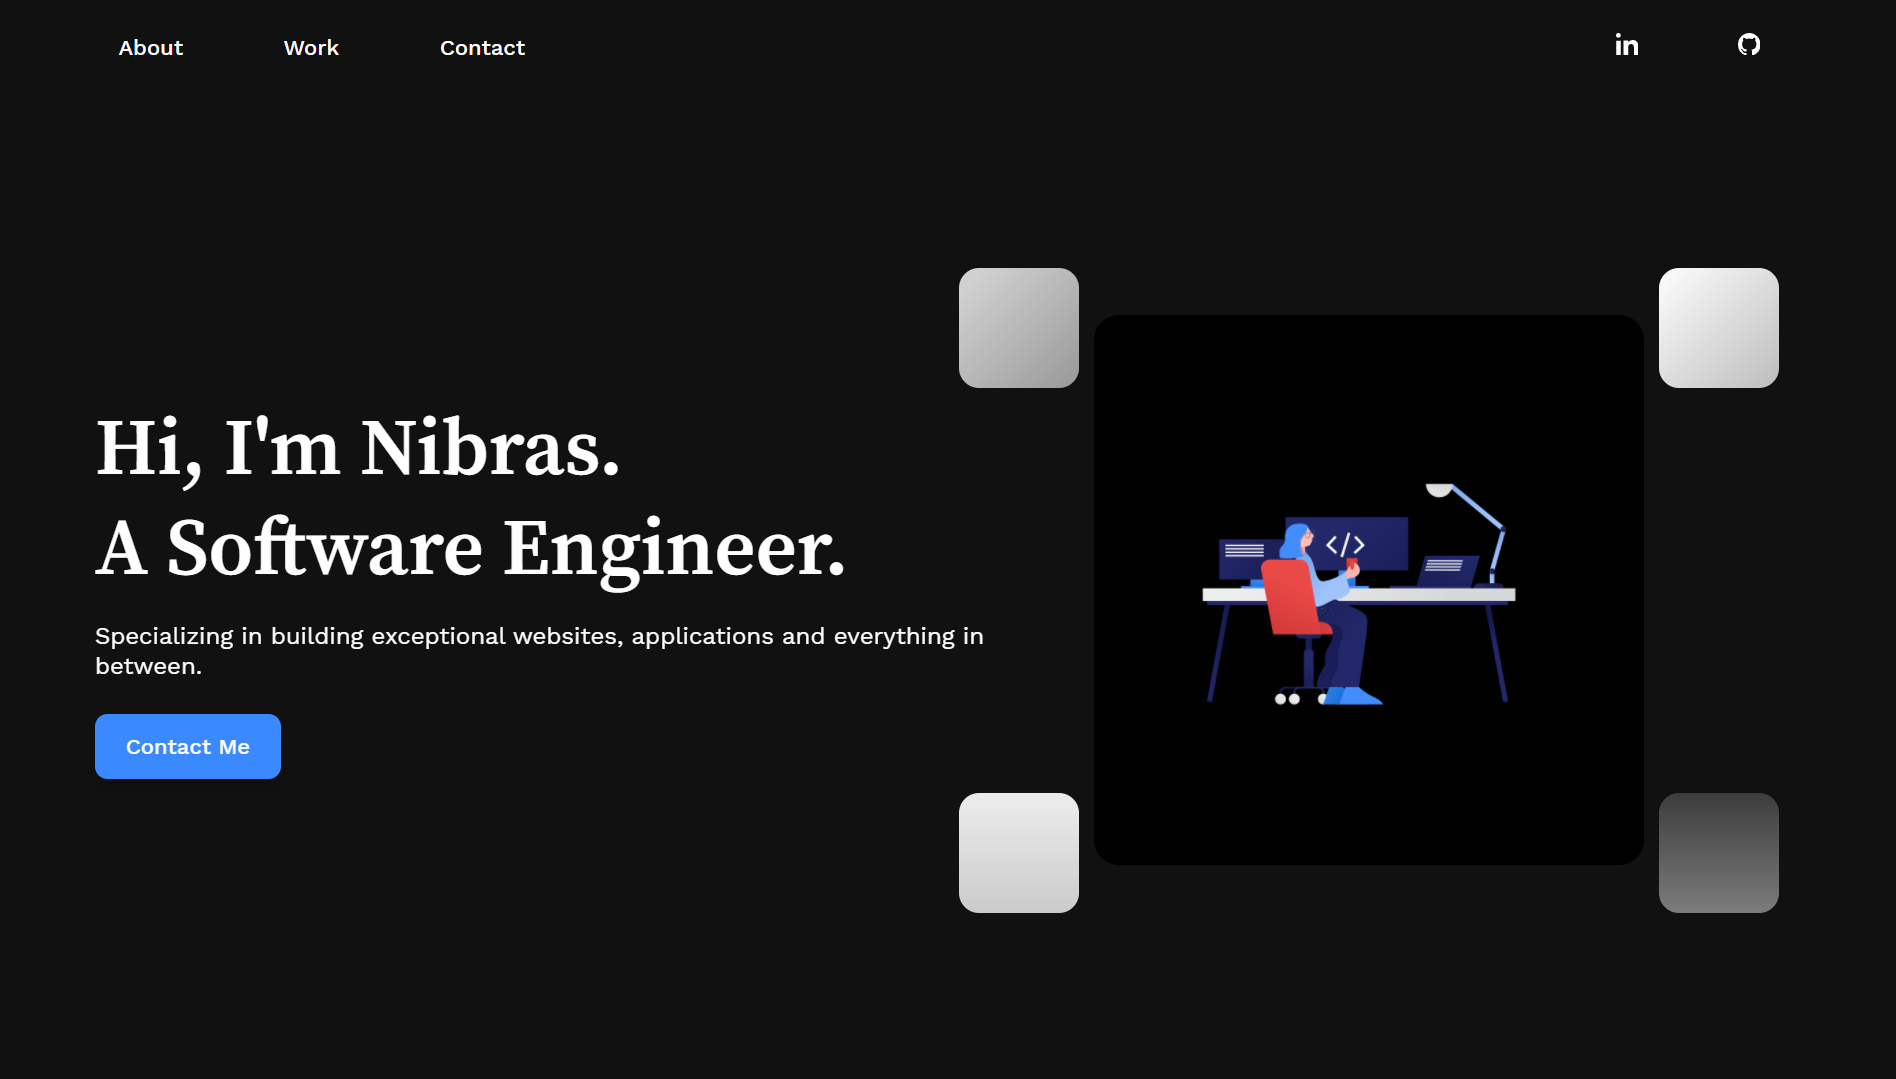 A personal portfolio site, Nibras is a software engineer